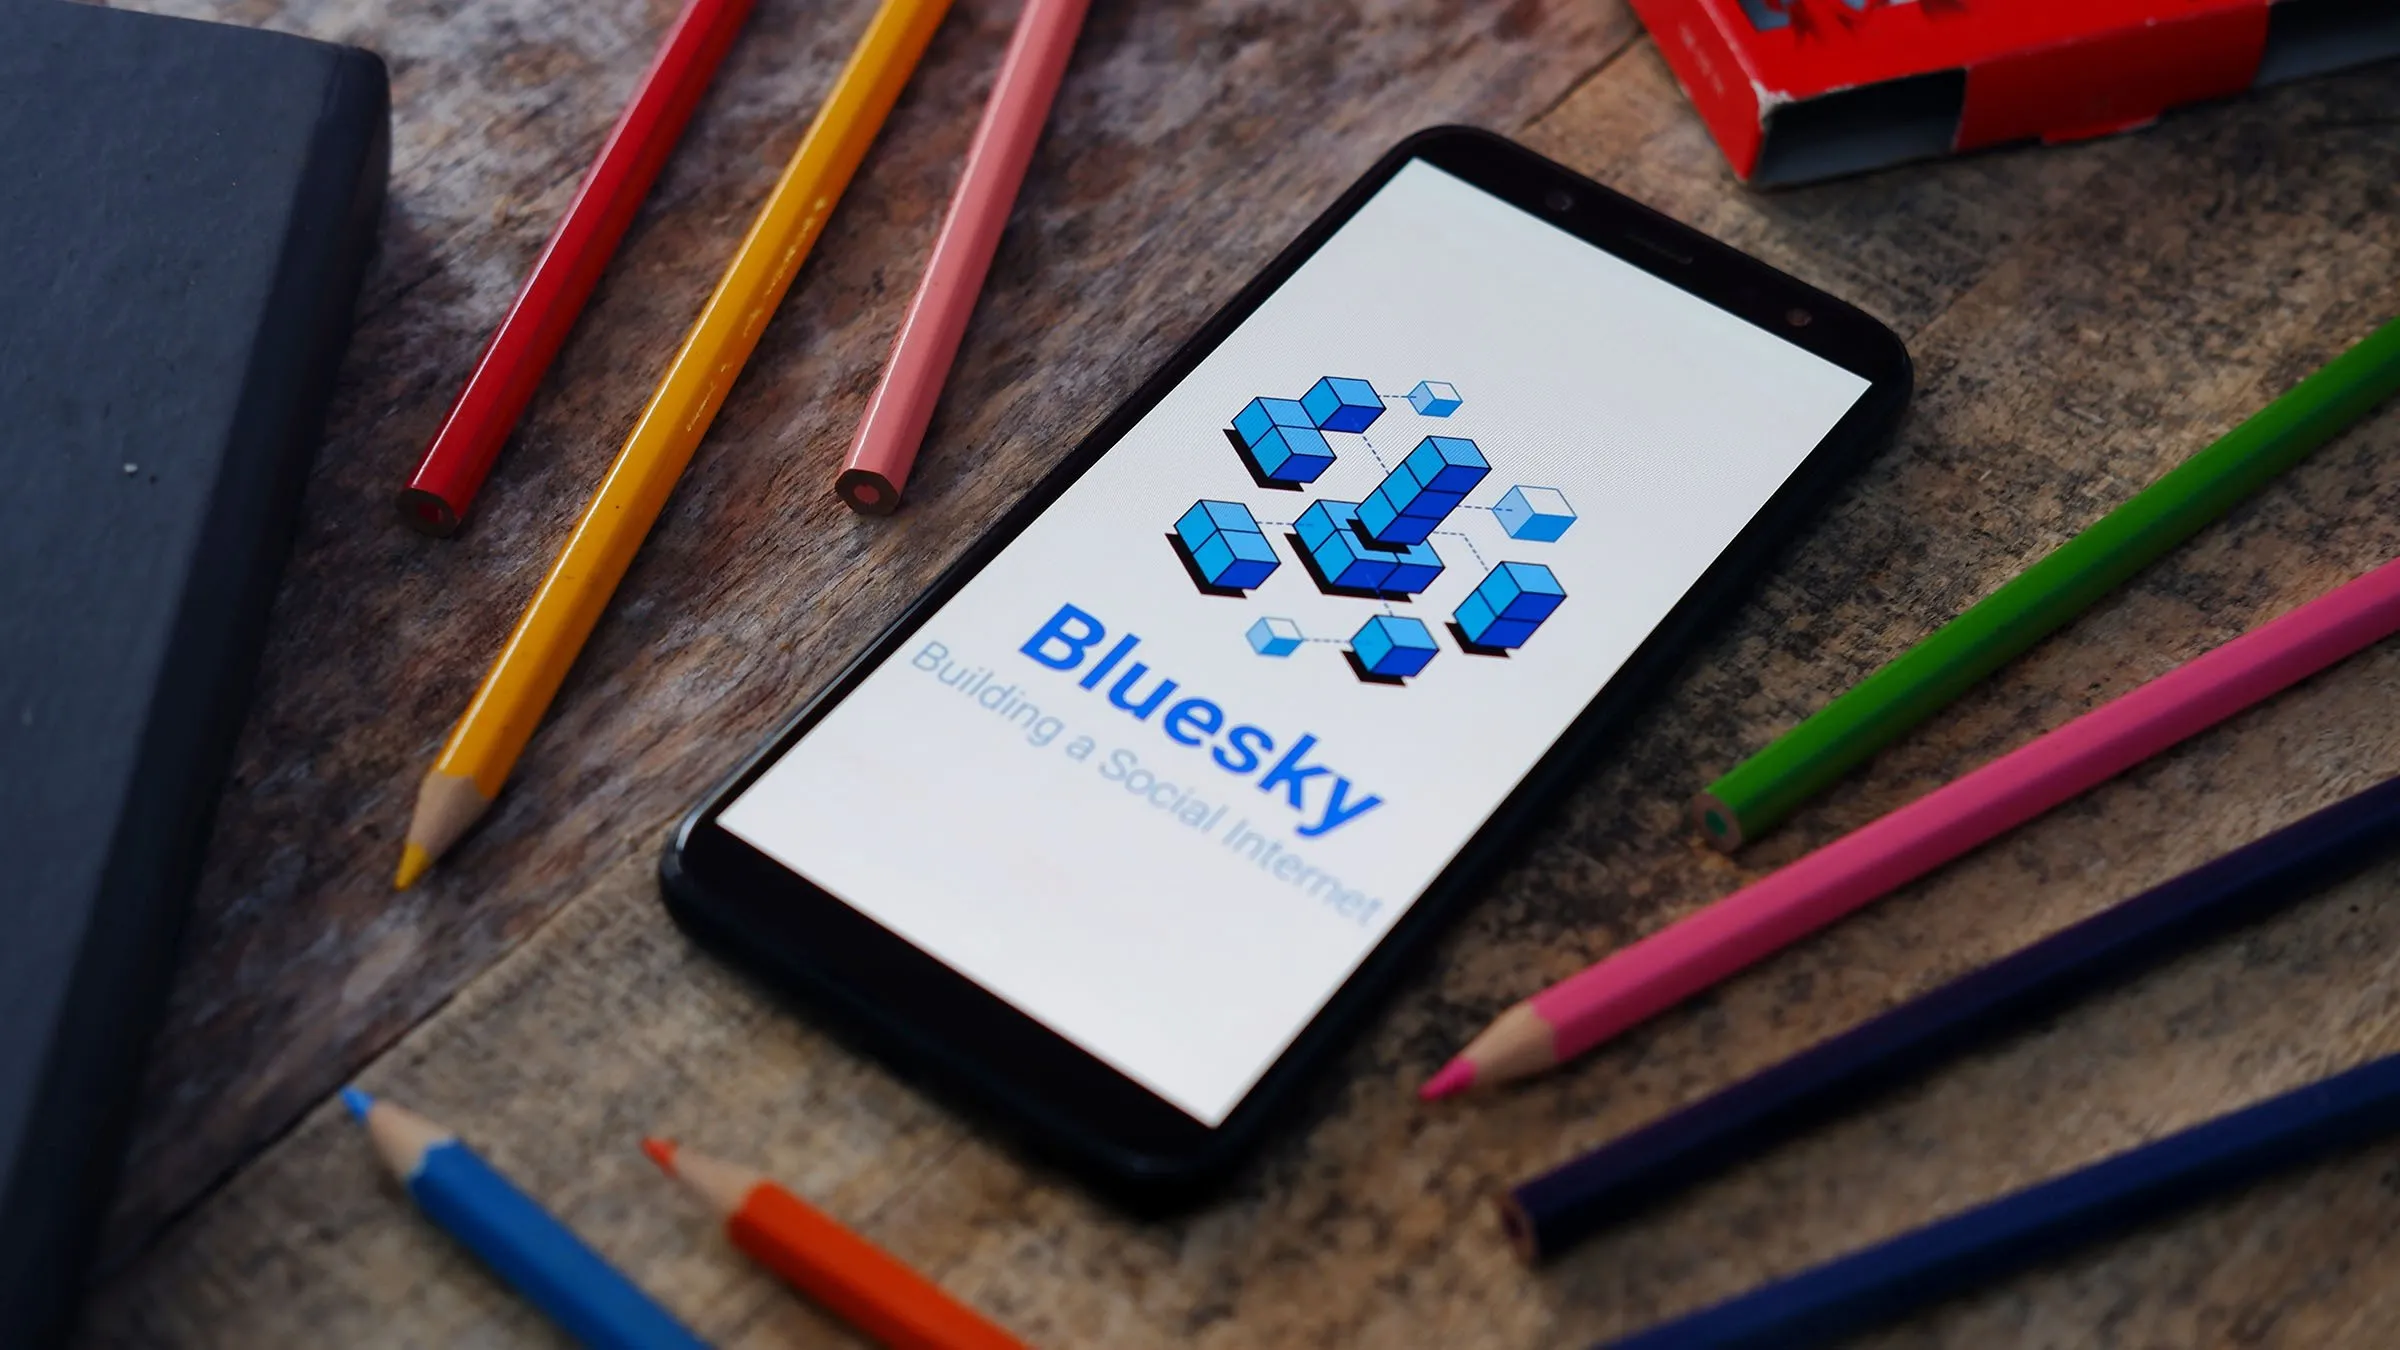 Bluesky is a new social media founded by former Twitter founder and CEO Jack Dorsey. Image: Shutterstock